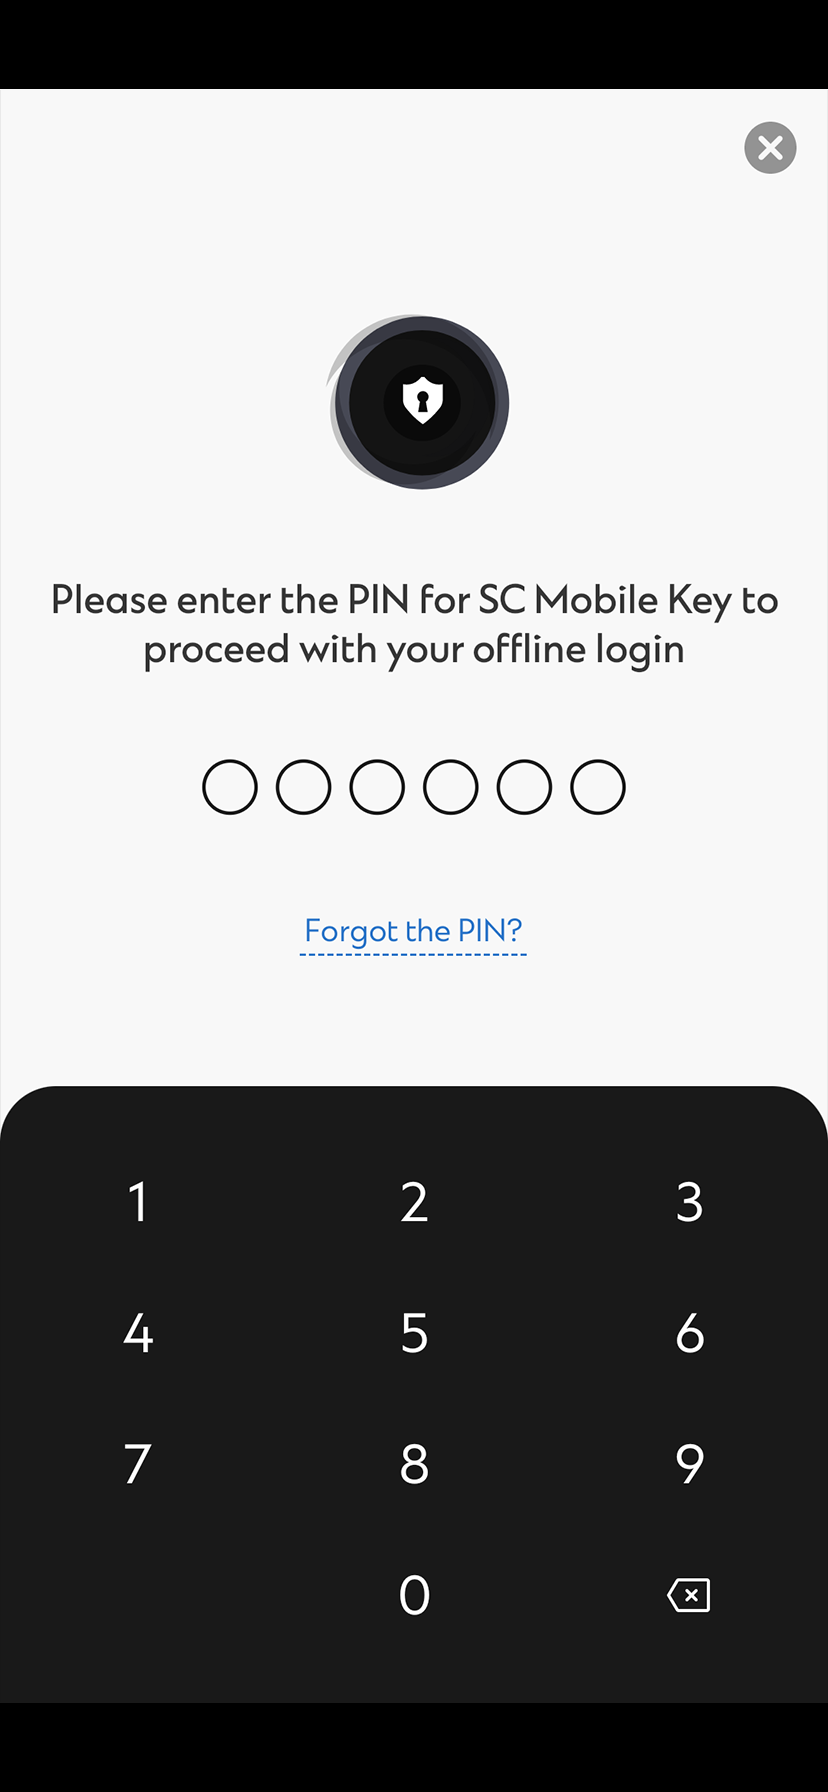 Perform high risk transactions Add an extra layer of protection with SC Mobile Key Step 3